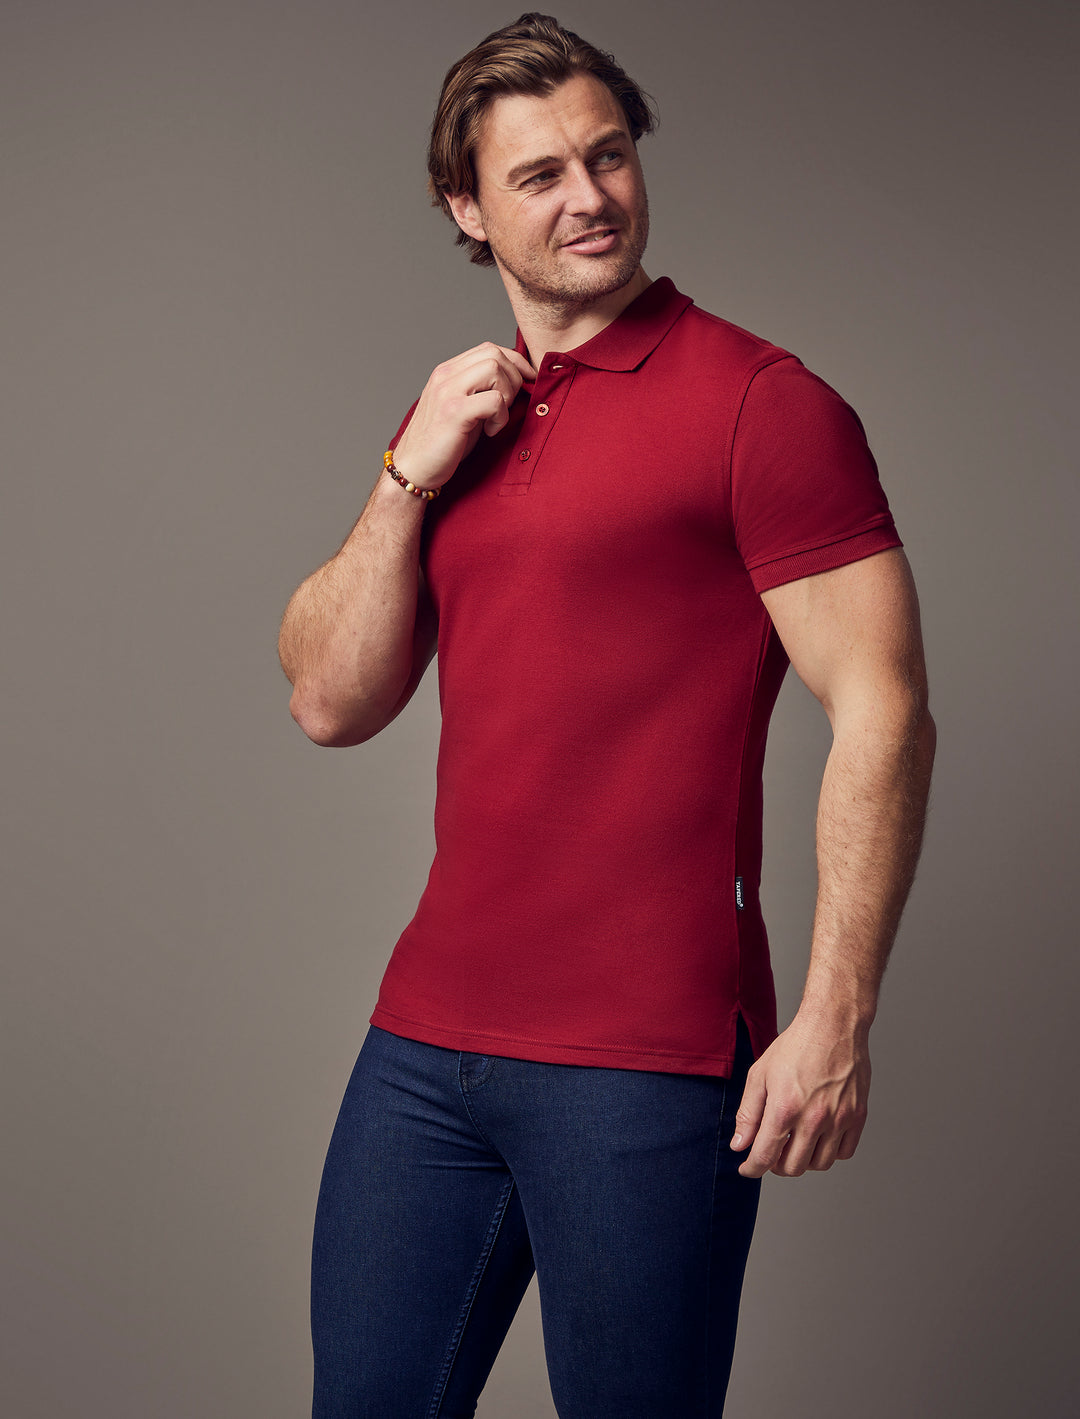 burgundy muscle fit short sleeve polo shirt, highlighting the tapered fit and premium quality offered by Tapered Menswear